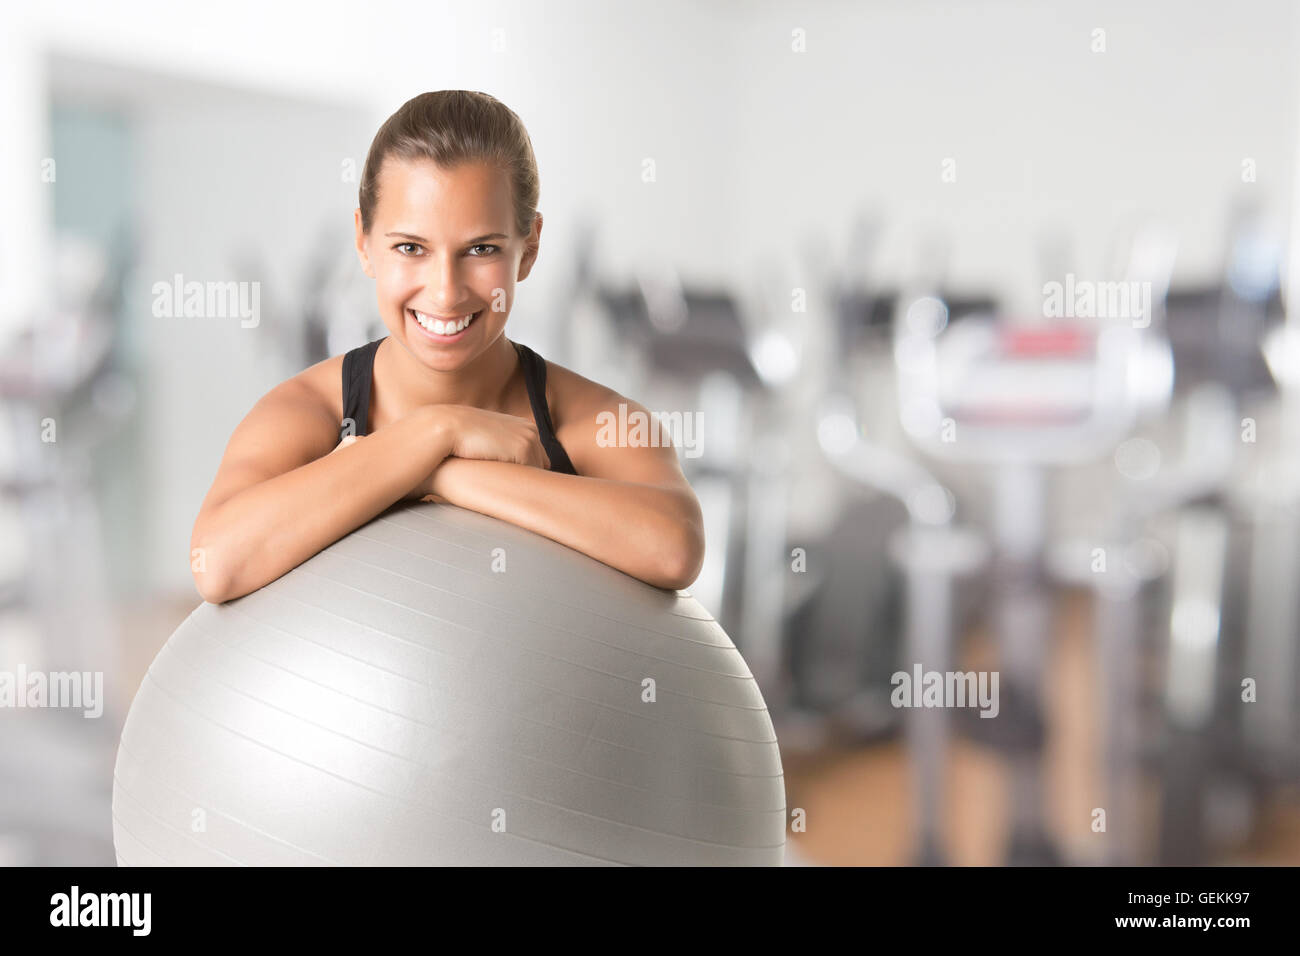 Fit woman sitting and holding a pilates ball on the floor, in a gym Stock Photo